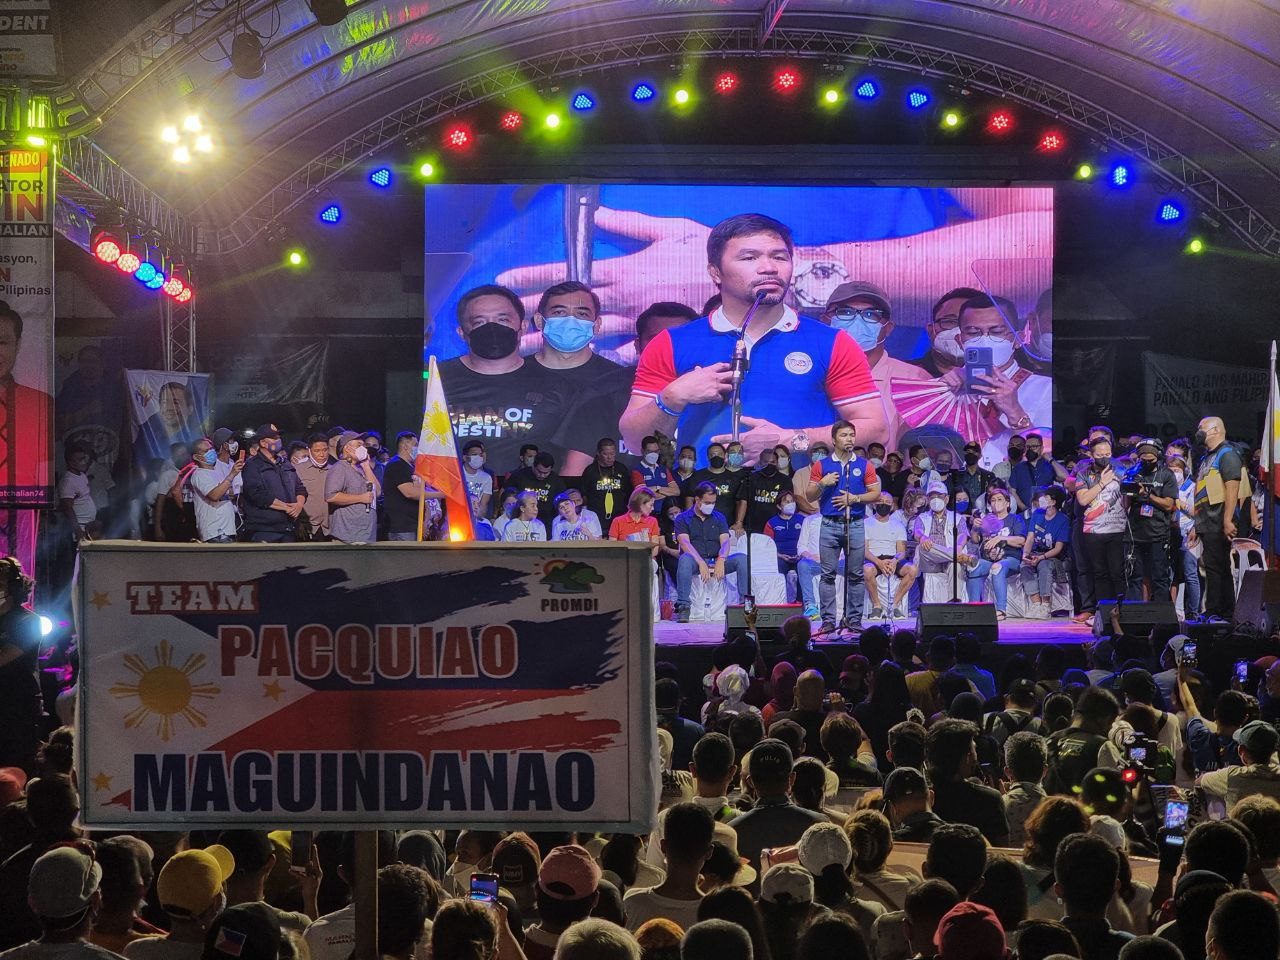 Manny Pacquiao: Better life for Filipinos means knocking out corruption